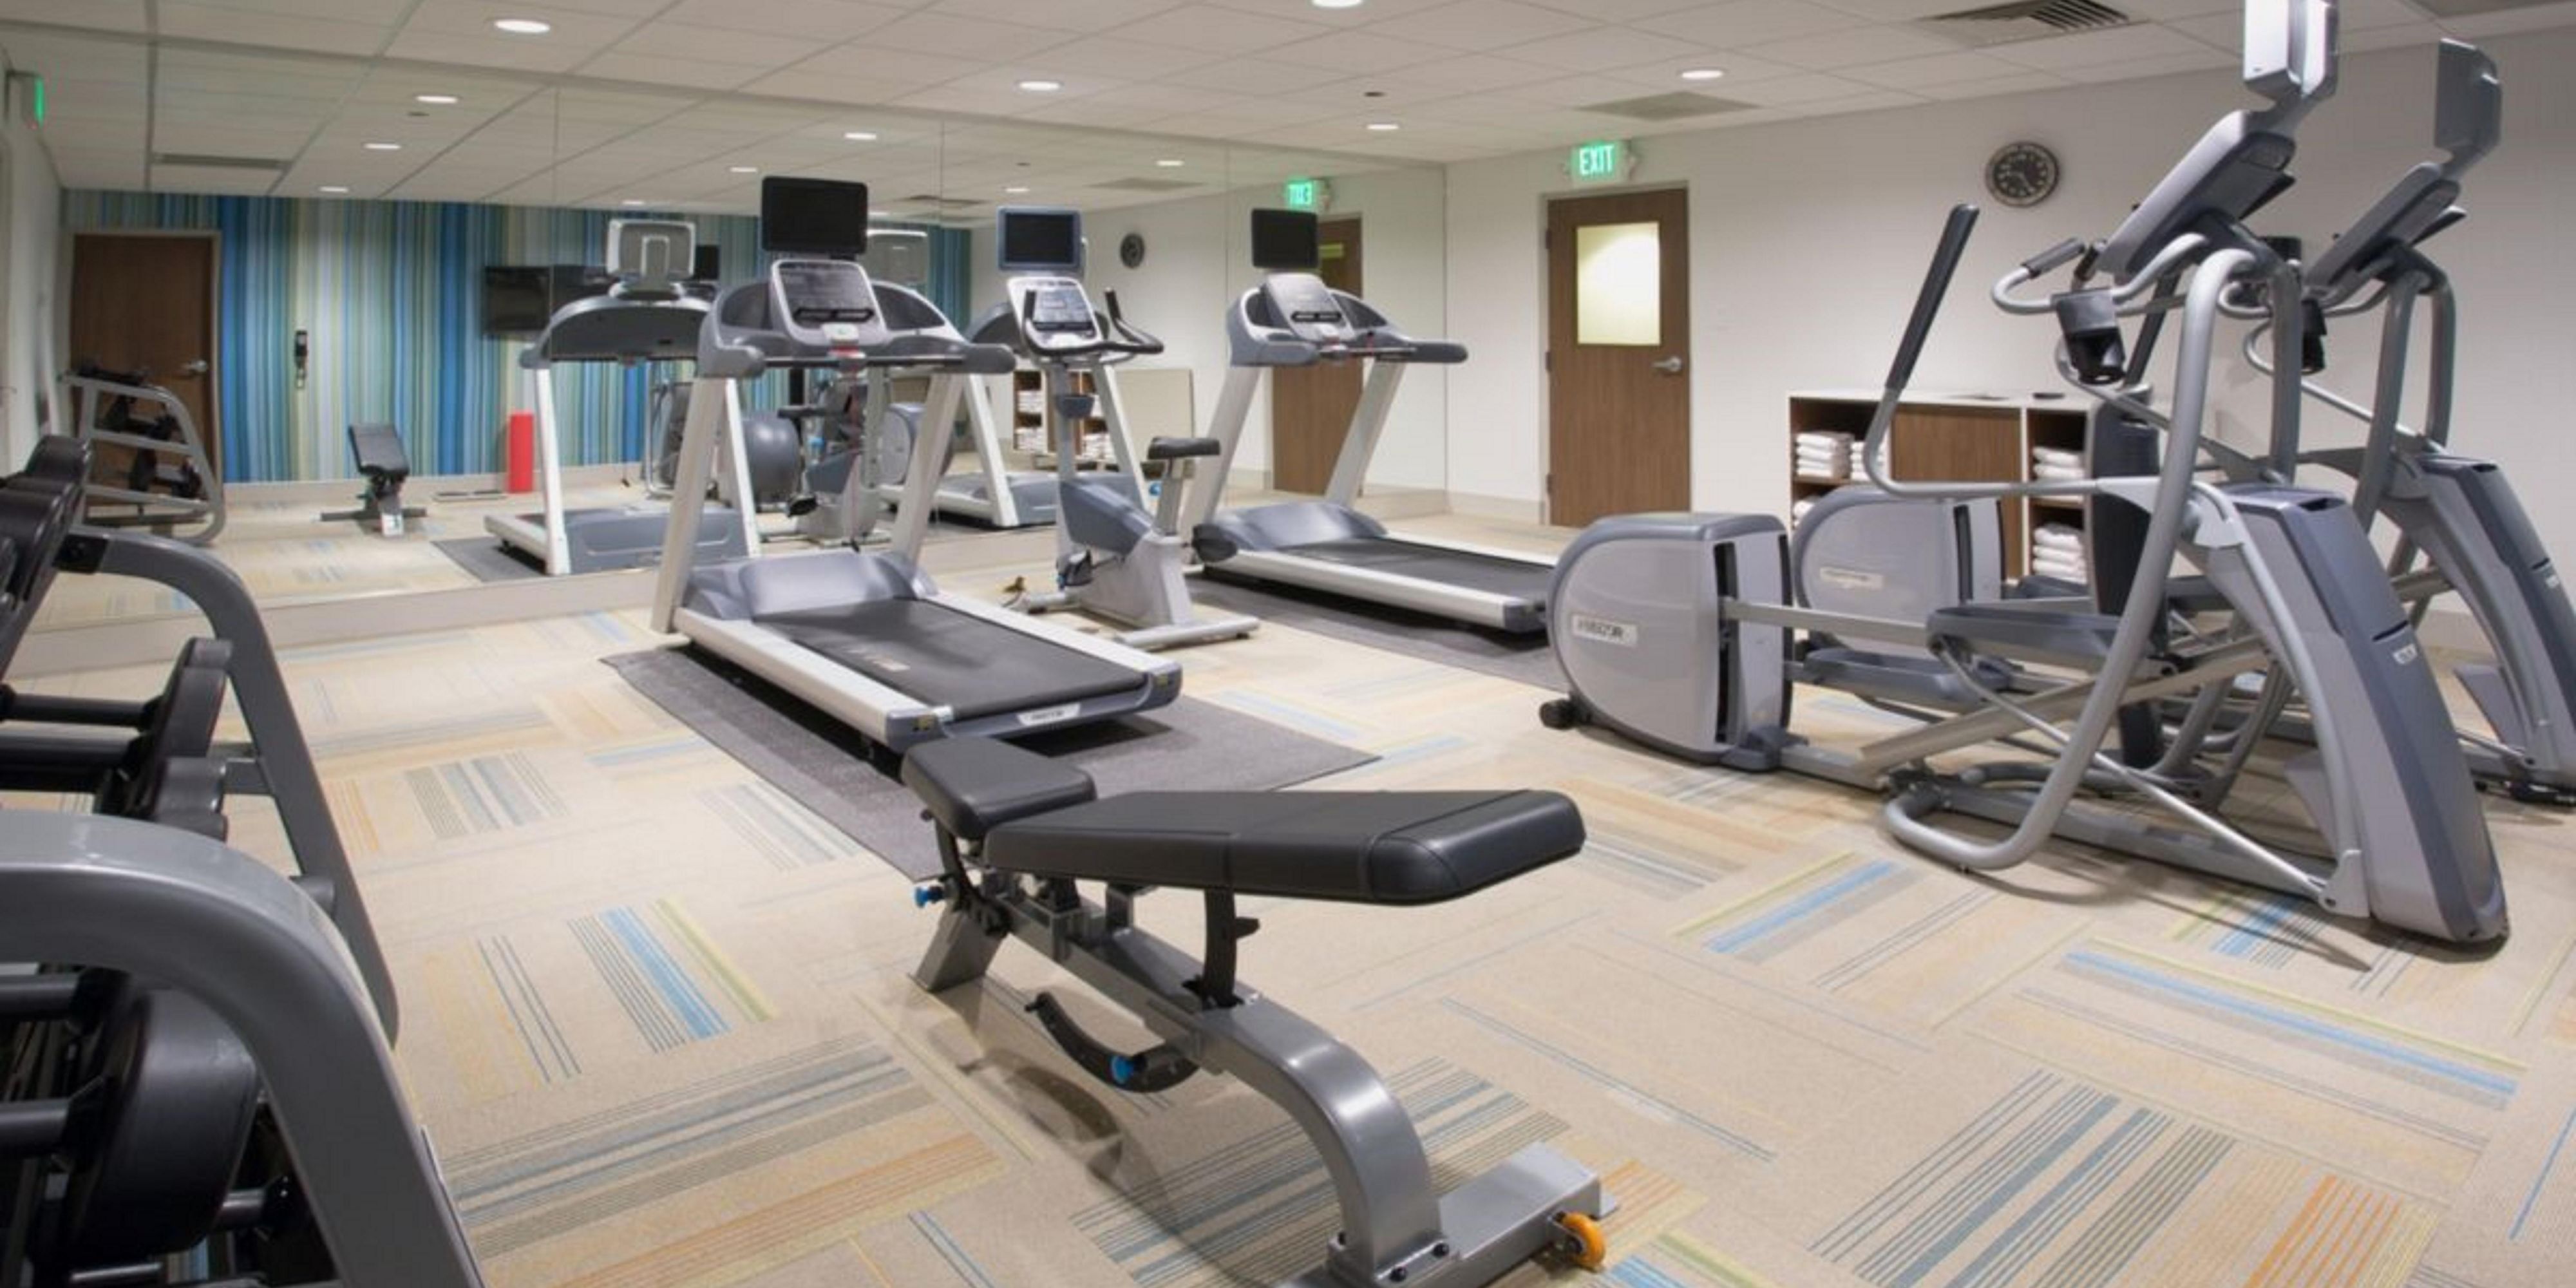 DON'T MISS YOUR DAILY WORKOUT!
Fit travelers, don't sweat it, we've got you covered! You're welcome to go for a swim in our heated indoor pool or enjoy an invigorating workout in our complimentary Fitness Center. You'll find treadmills, elliptical machines, free weights or a stationary bicycle available just for you! Stay smart and fit when you sta